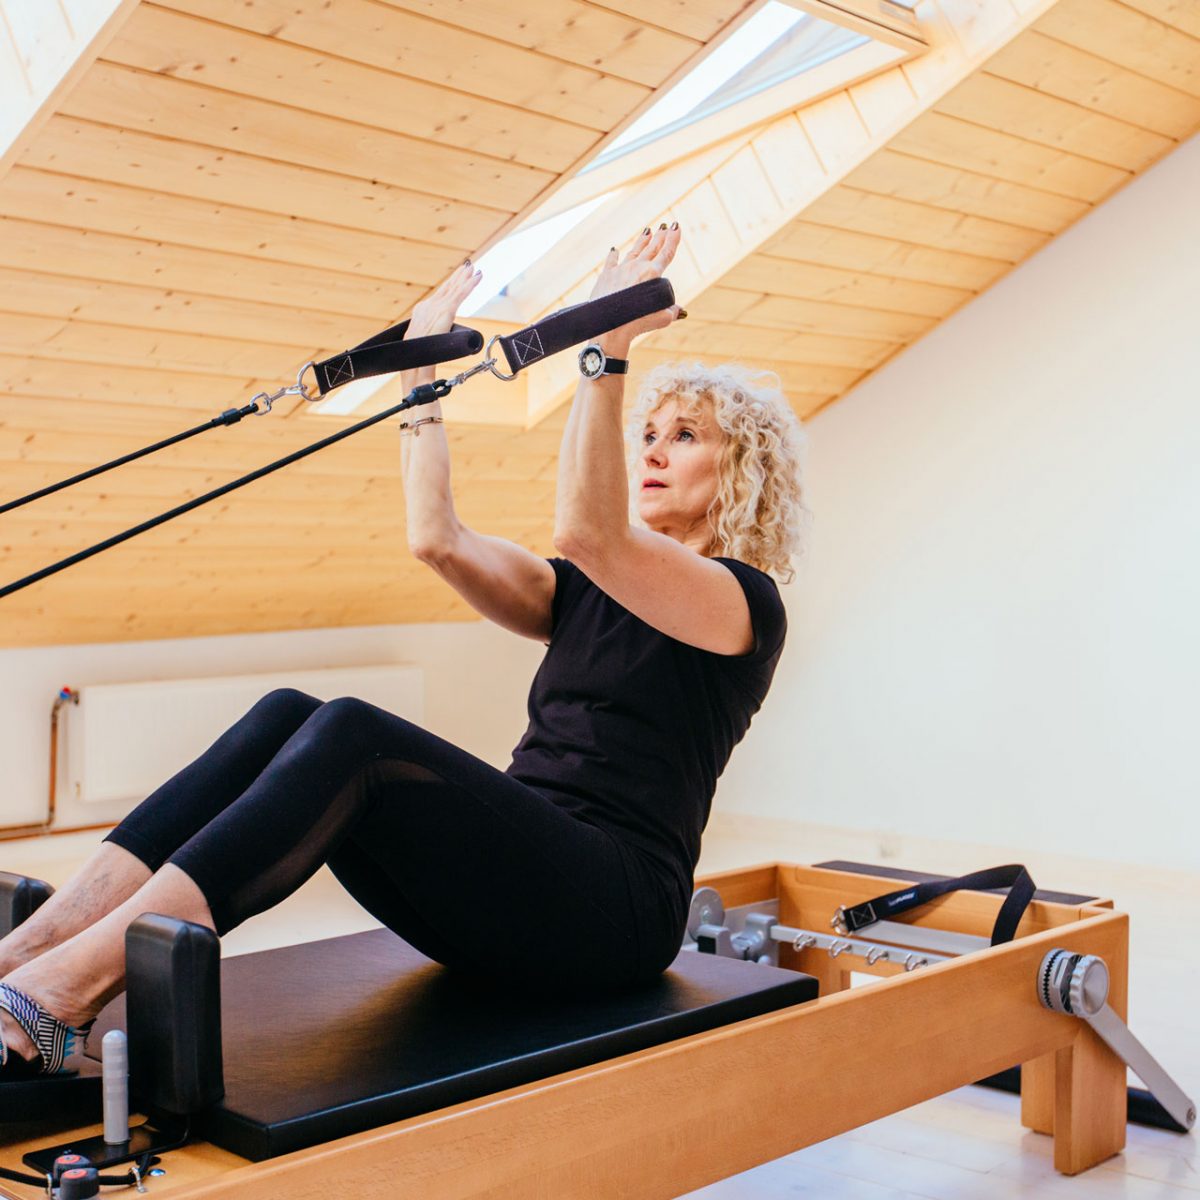 Pilates Reformer Used By Woman In New Zealand